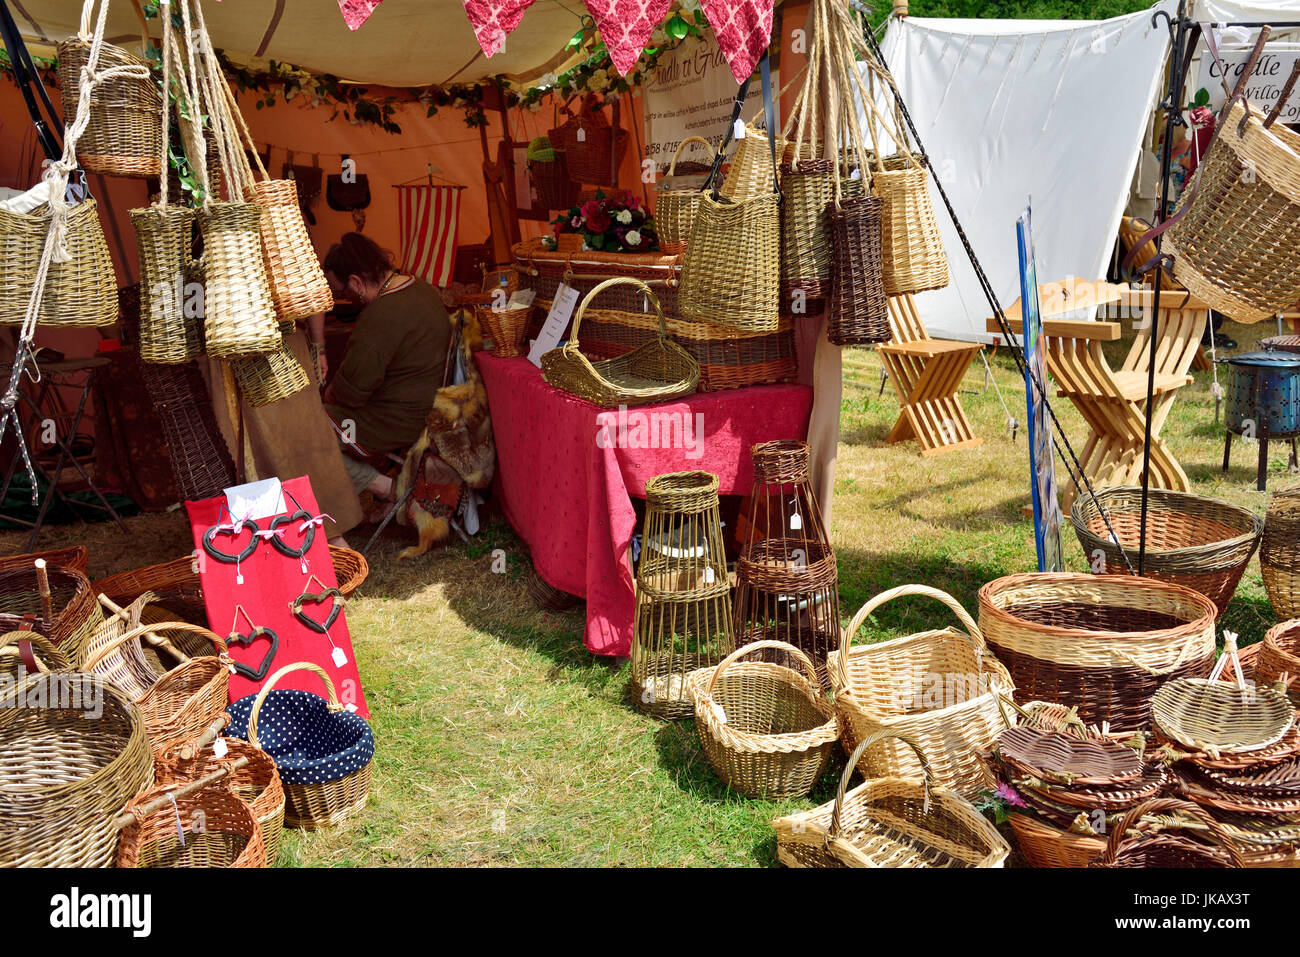 Craft stall selling traditional willow woven baskets at Tewkesbury Medieval Festival Stock Photo